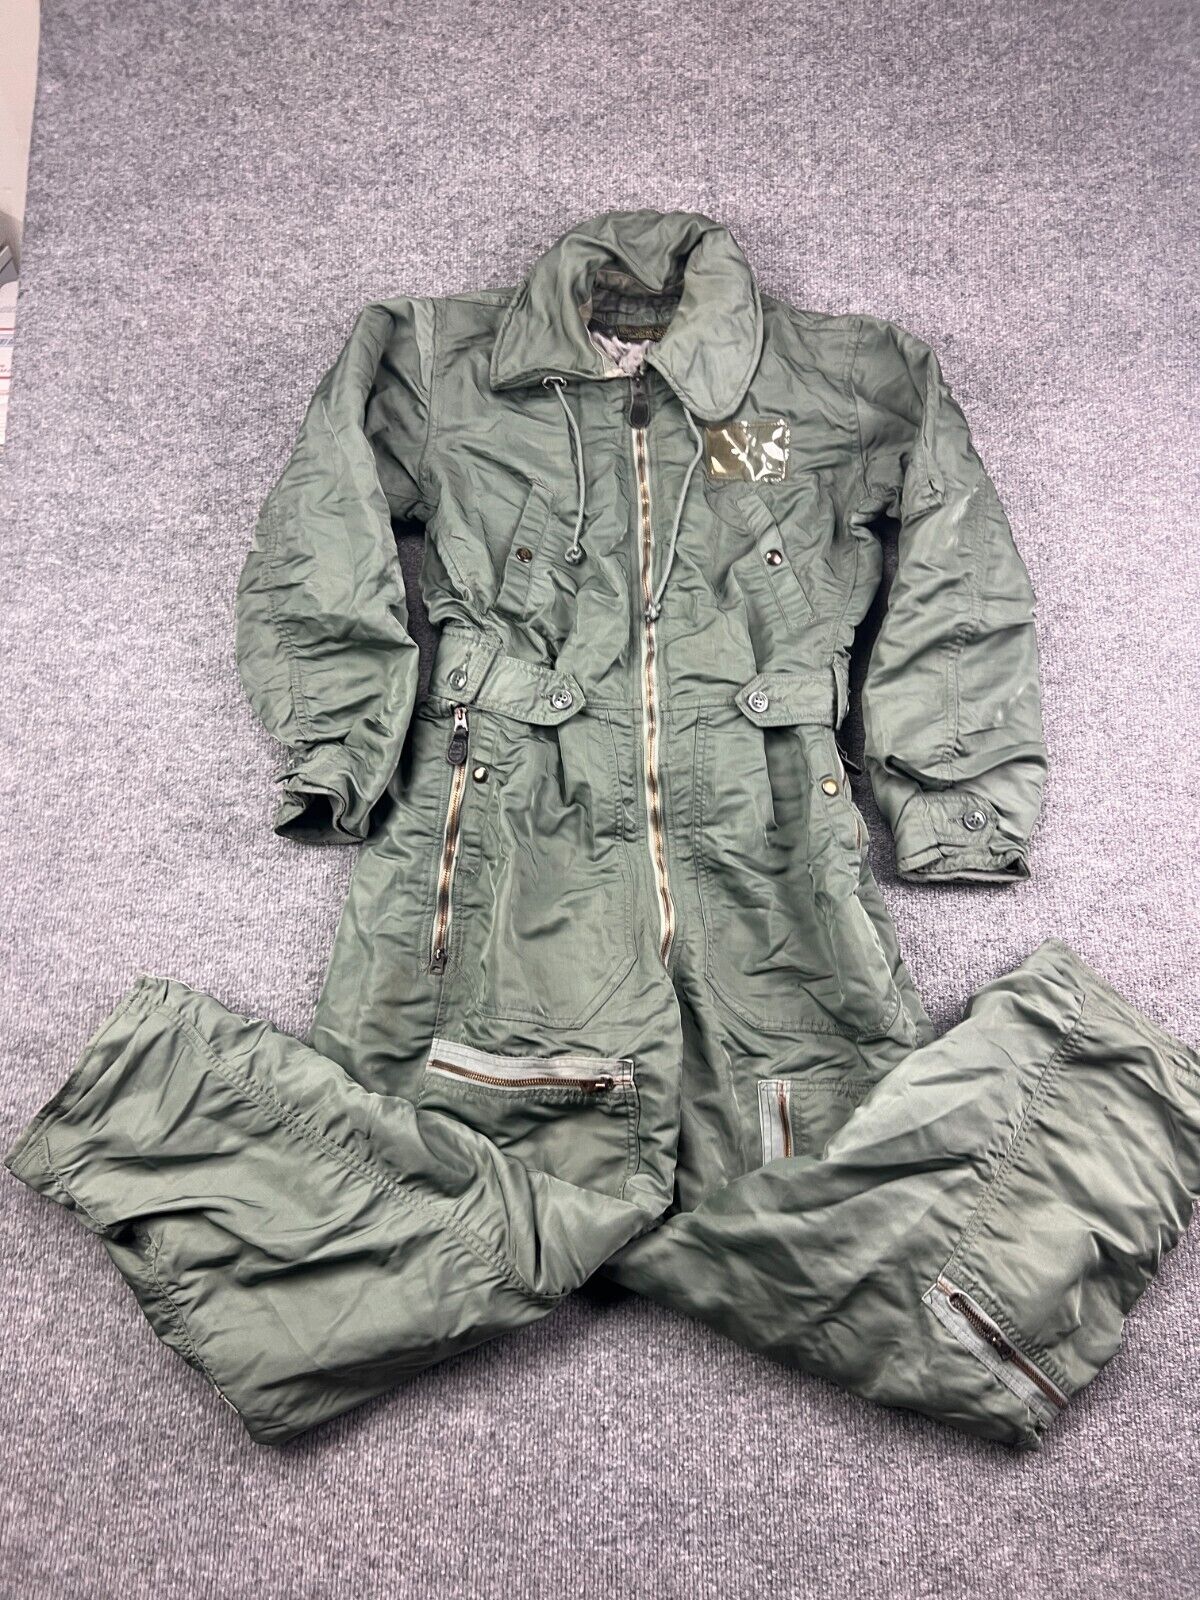 Vintage US Air Force Flying Coveralls Men's Small Long Green CWU-1/P MIL-C257R6